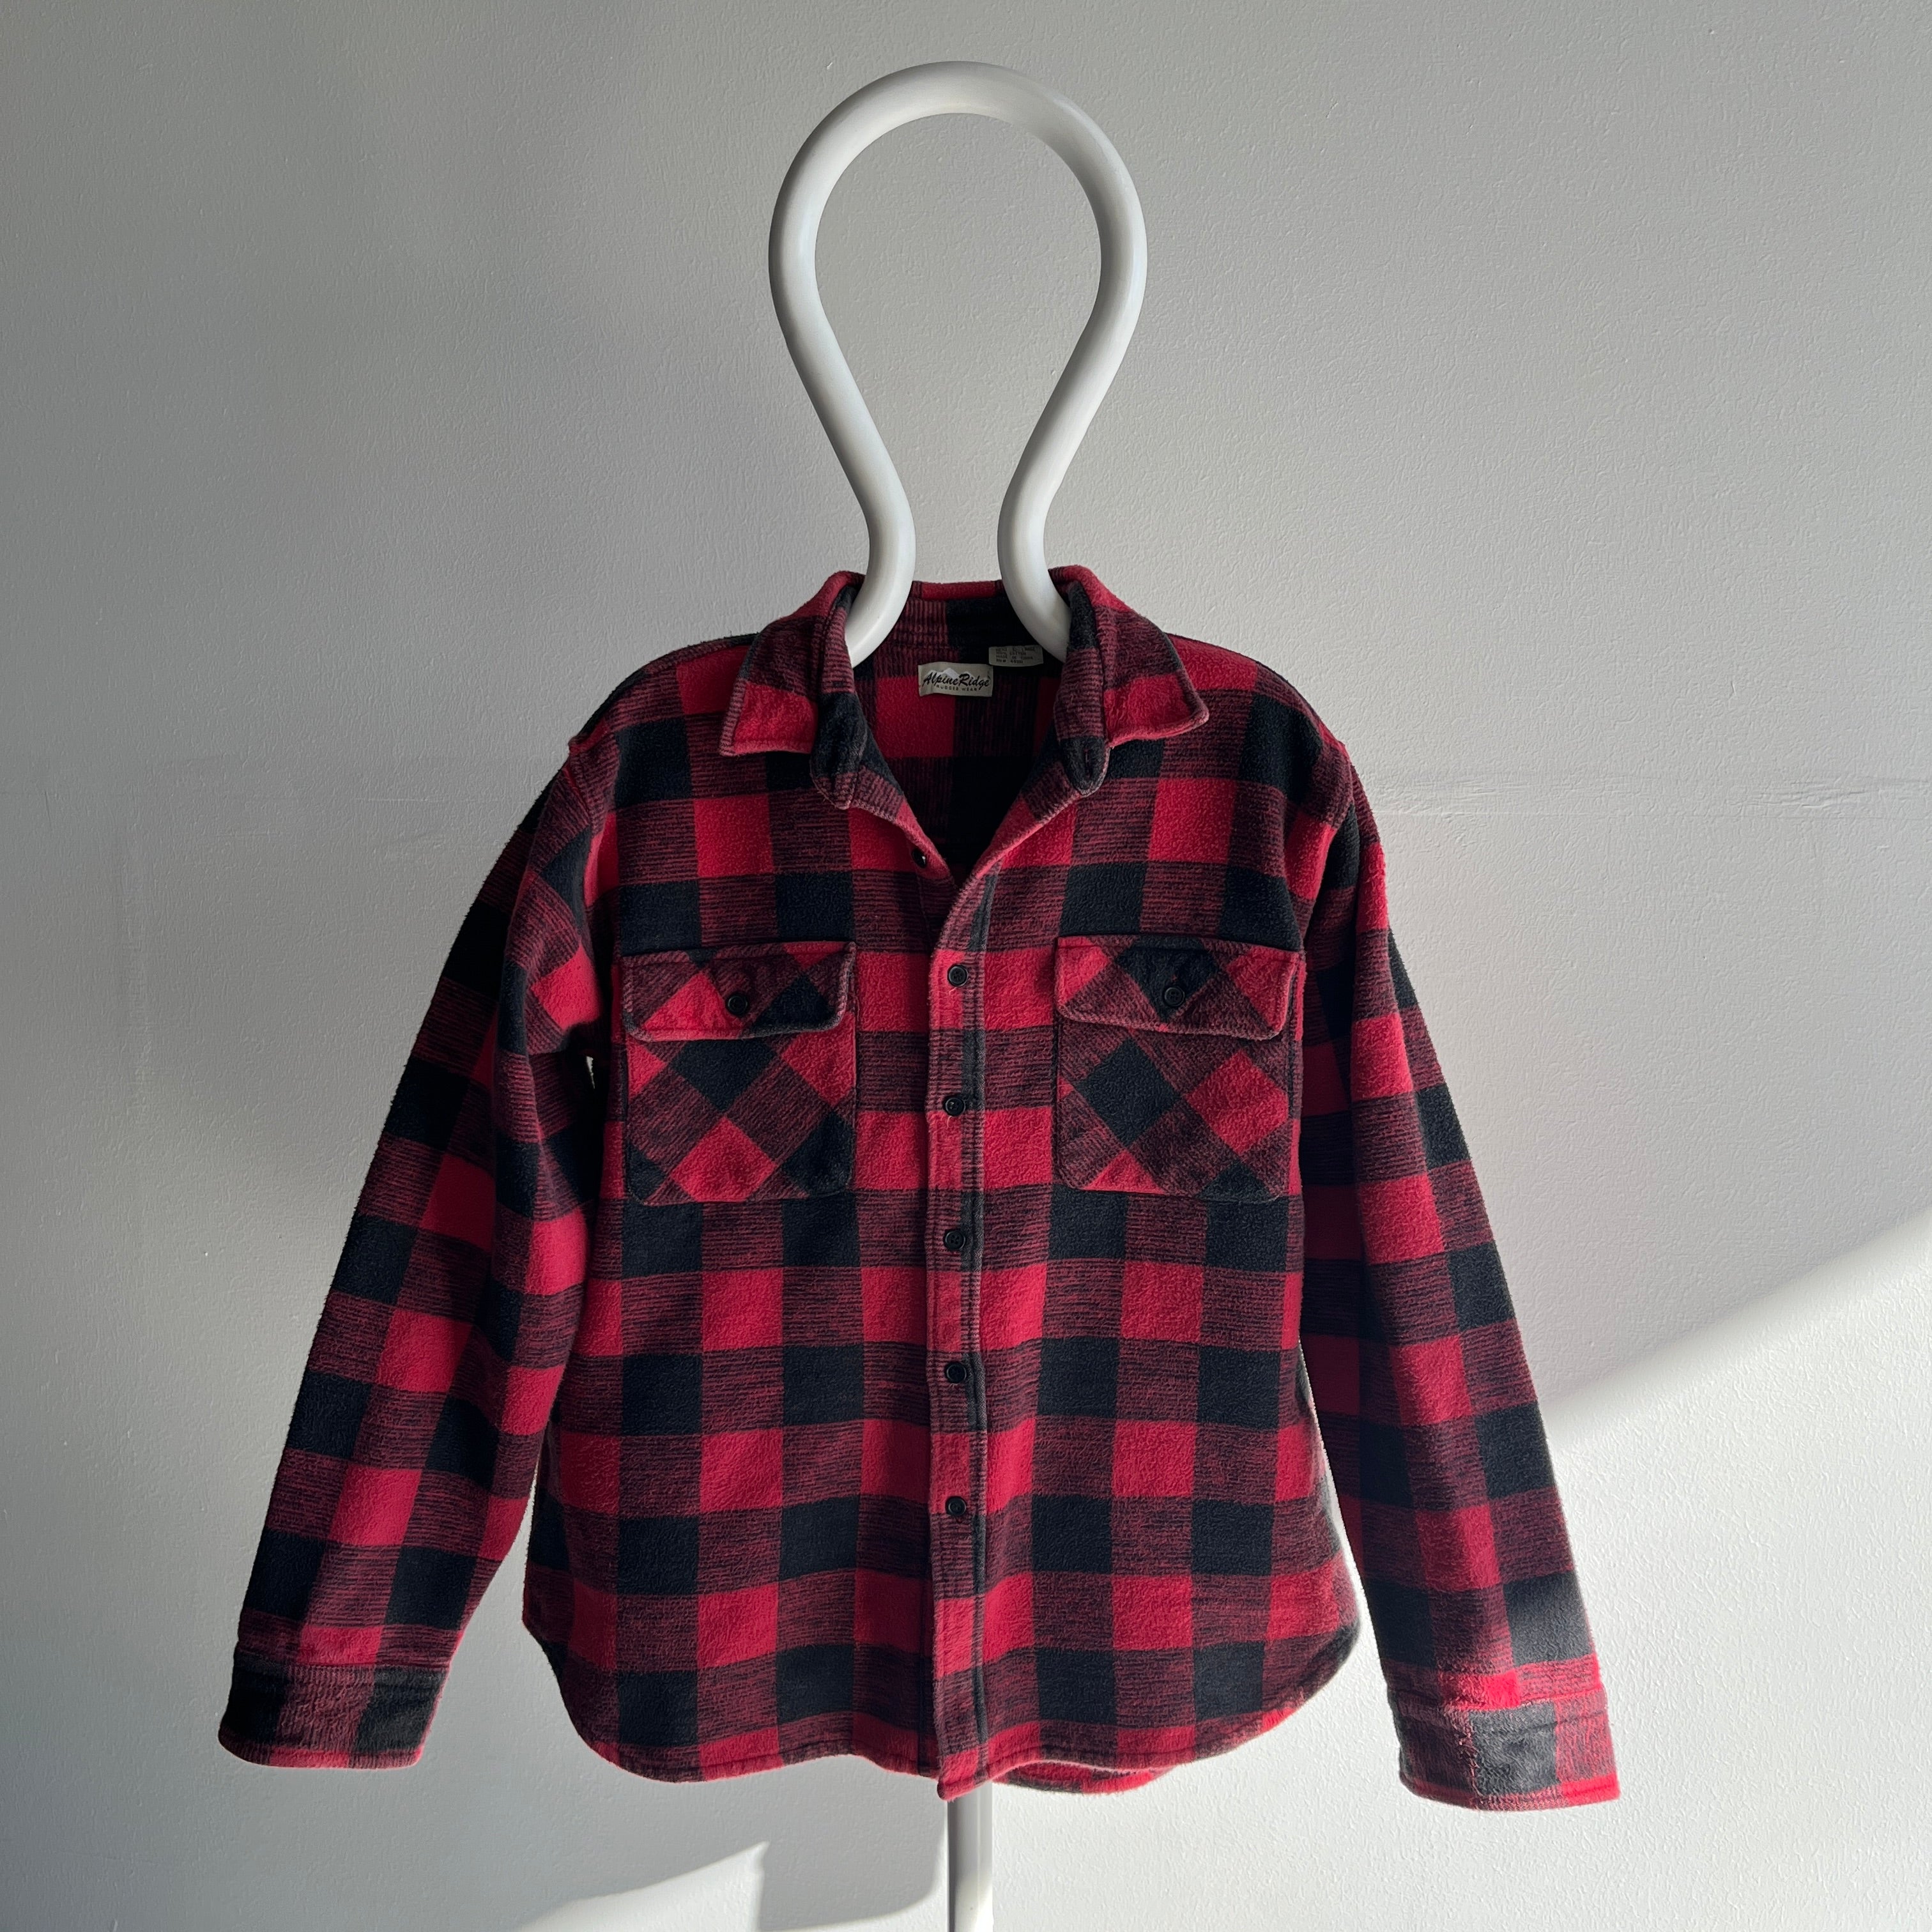 1990/2000s Heavyweight and Structured Buffalo Plaid Flannel